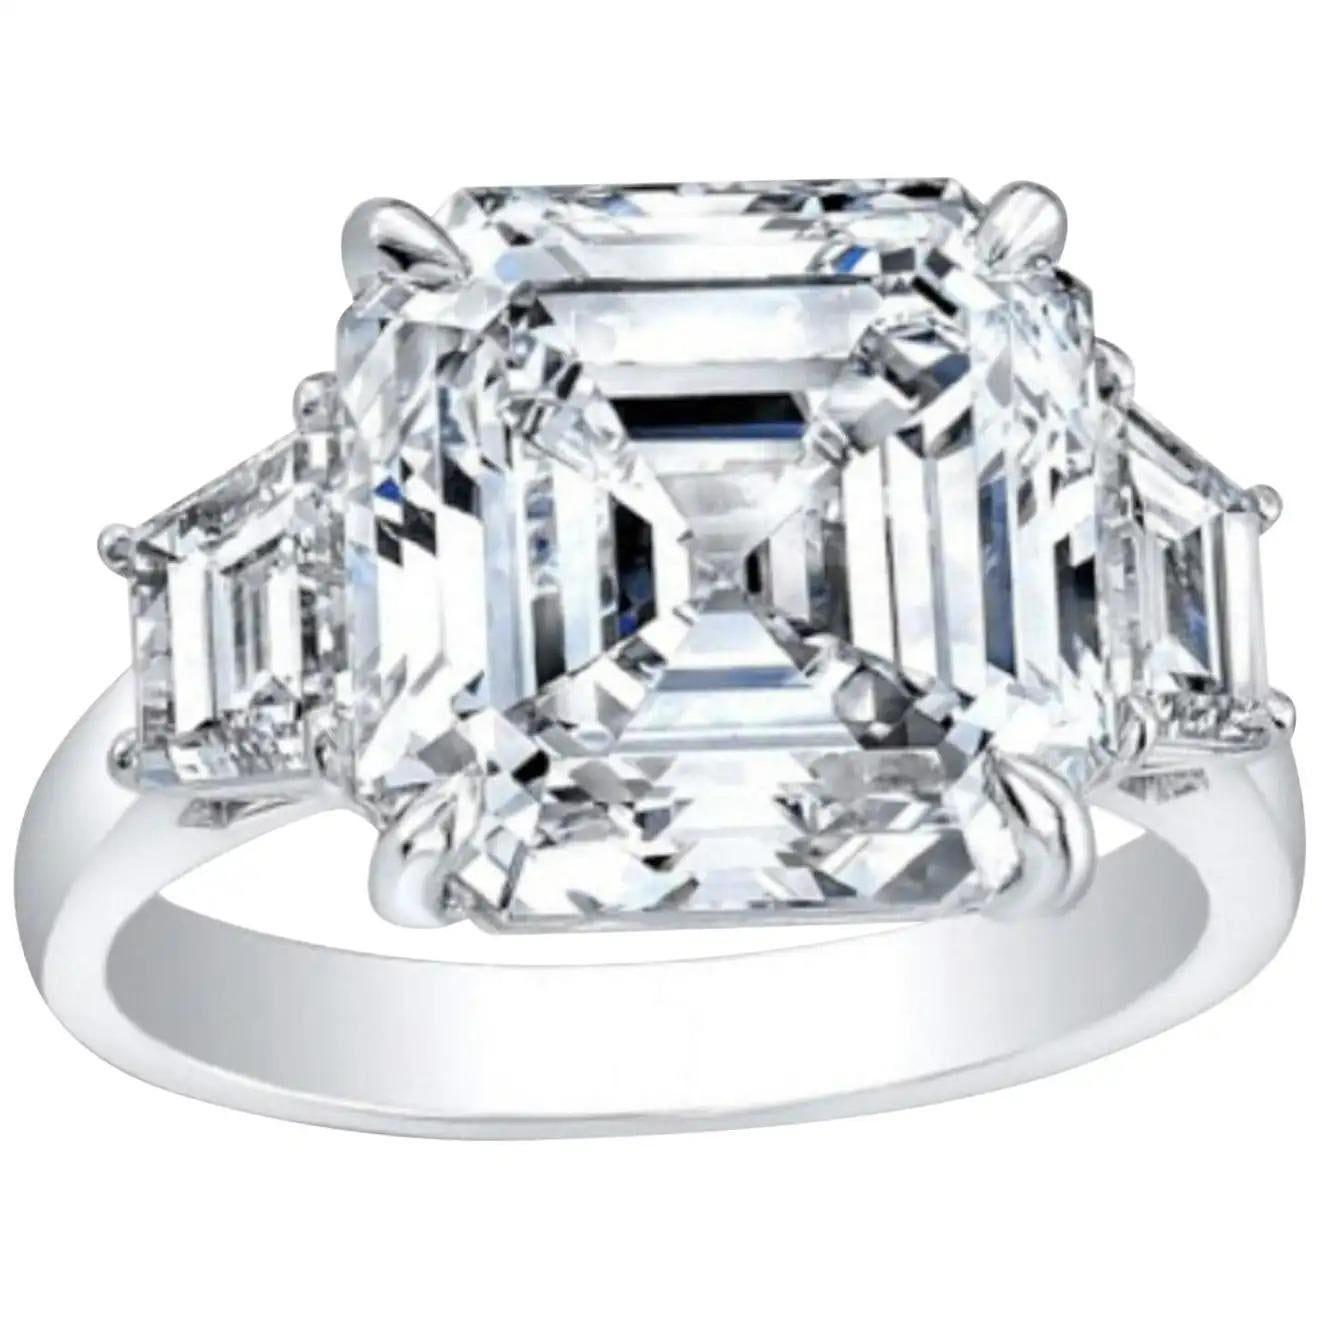 Elevate your love story with the timeless elegance of this GIA Certified 4.01 Carat Asscher Cut Diamond Engagement Ring, adorned with two trapezoid-cut diamonds on each side, all set in 18K gold. The centerpiece of this exquisite ring is a dazzling